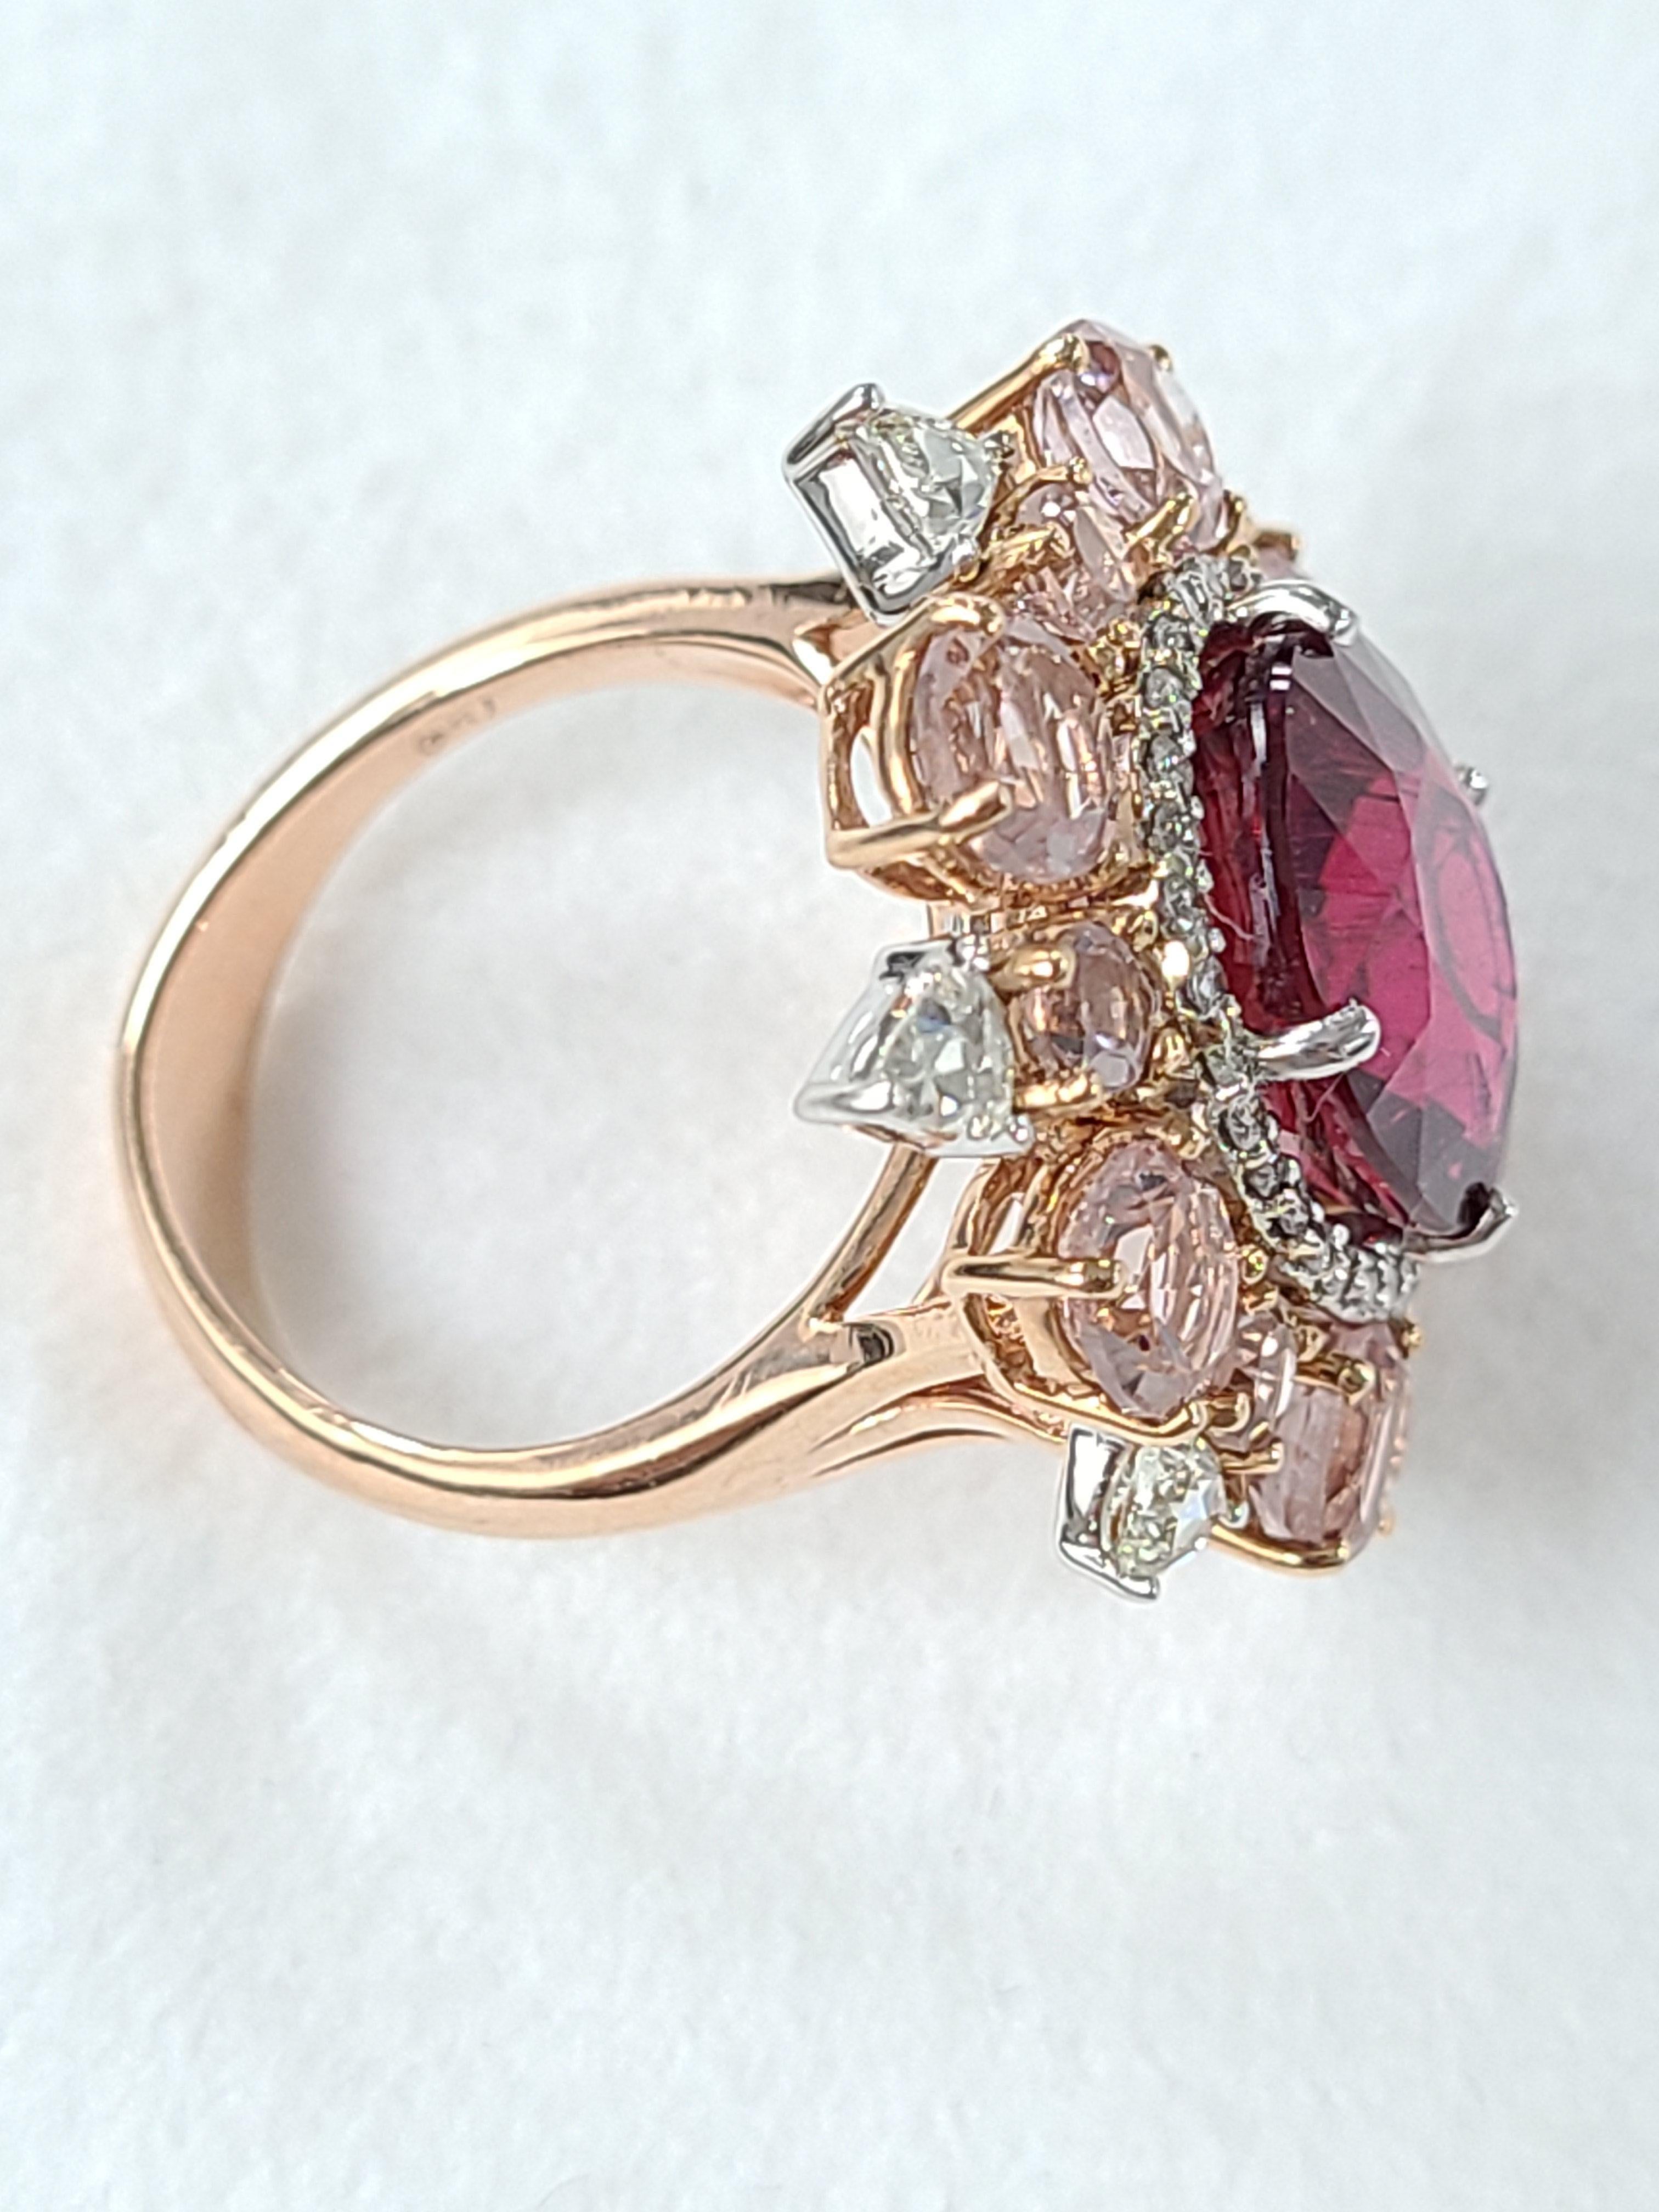 A beautiful ring set with rubellite and morganite combination with diamonds . rubylite weight is 8.23 carats and morganite weight is 3.65 carats with diamond weight of .94 carats . US ring size 6 1/2.